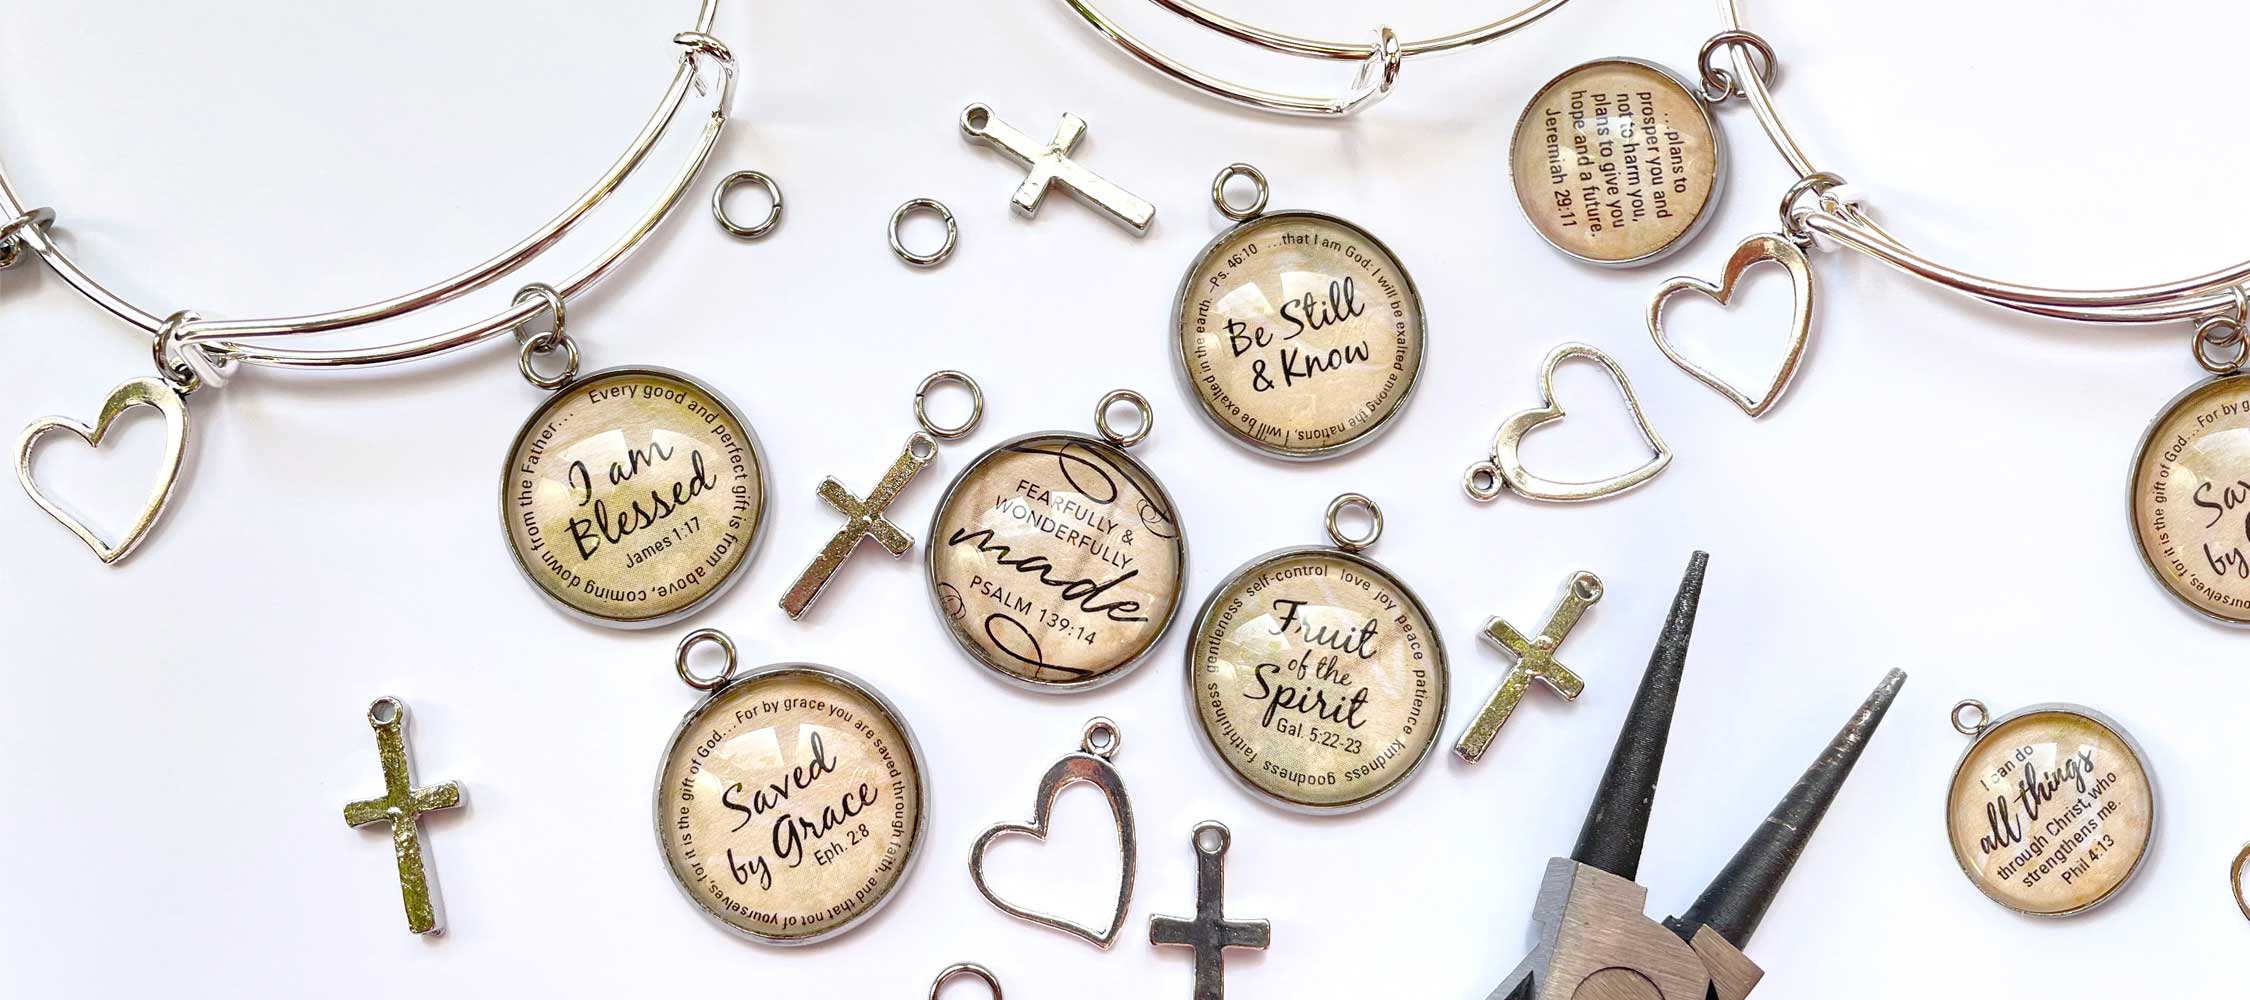 3 Tips On Making Your Own Spiritual Jewelry